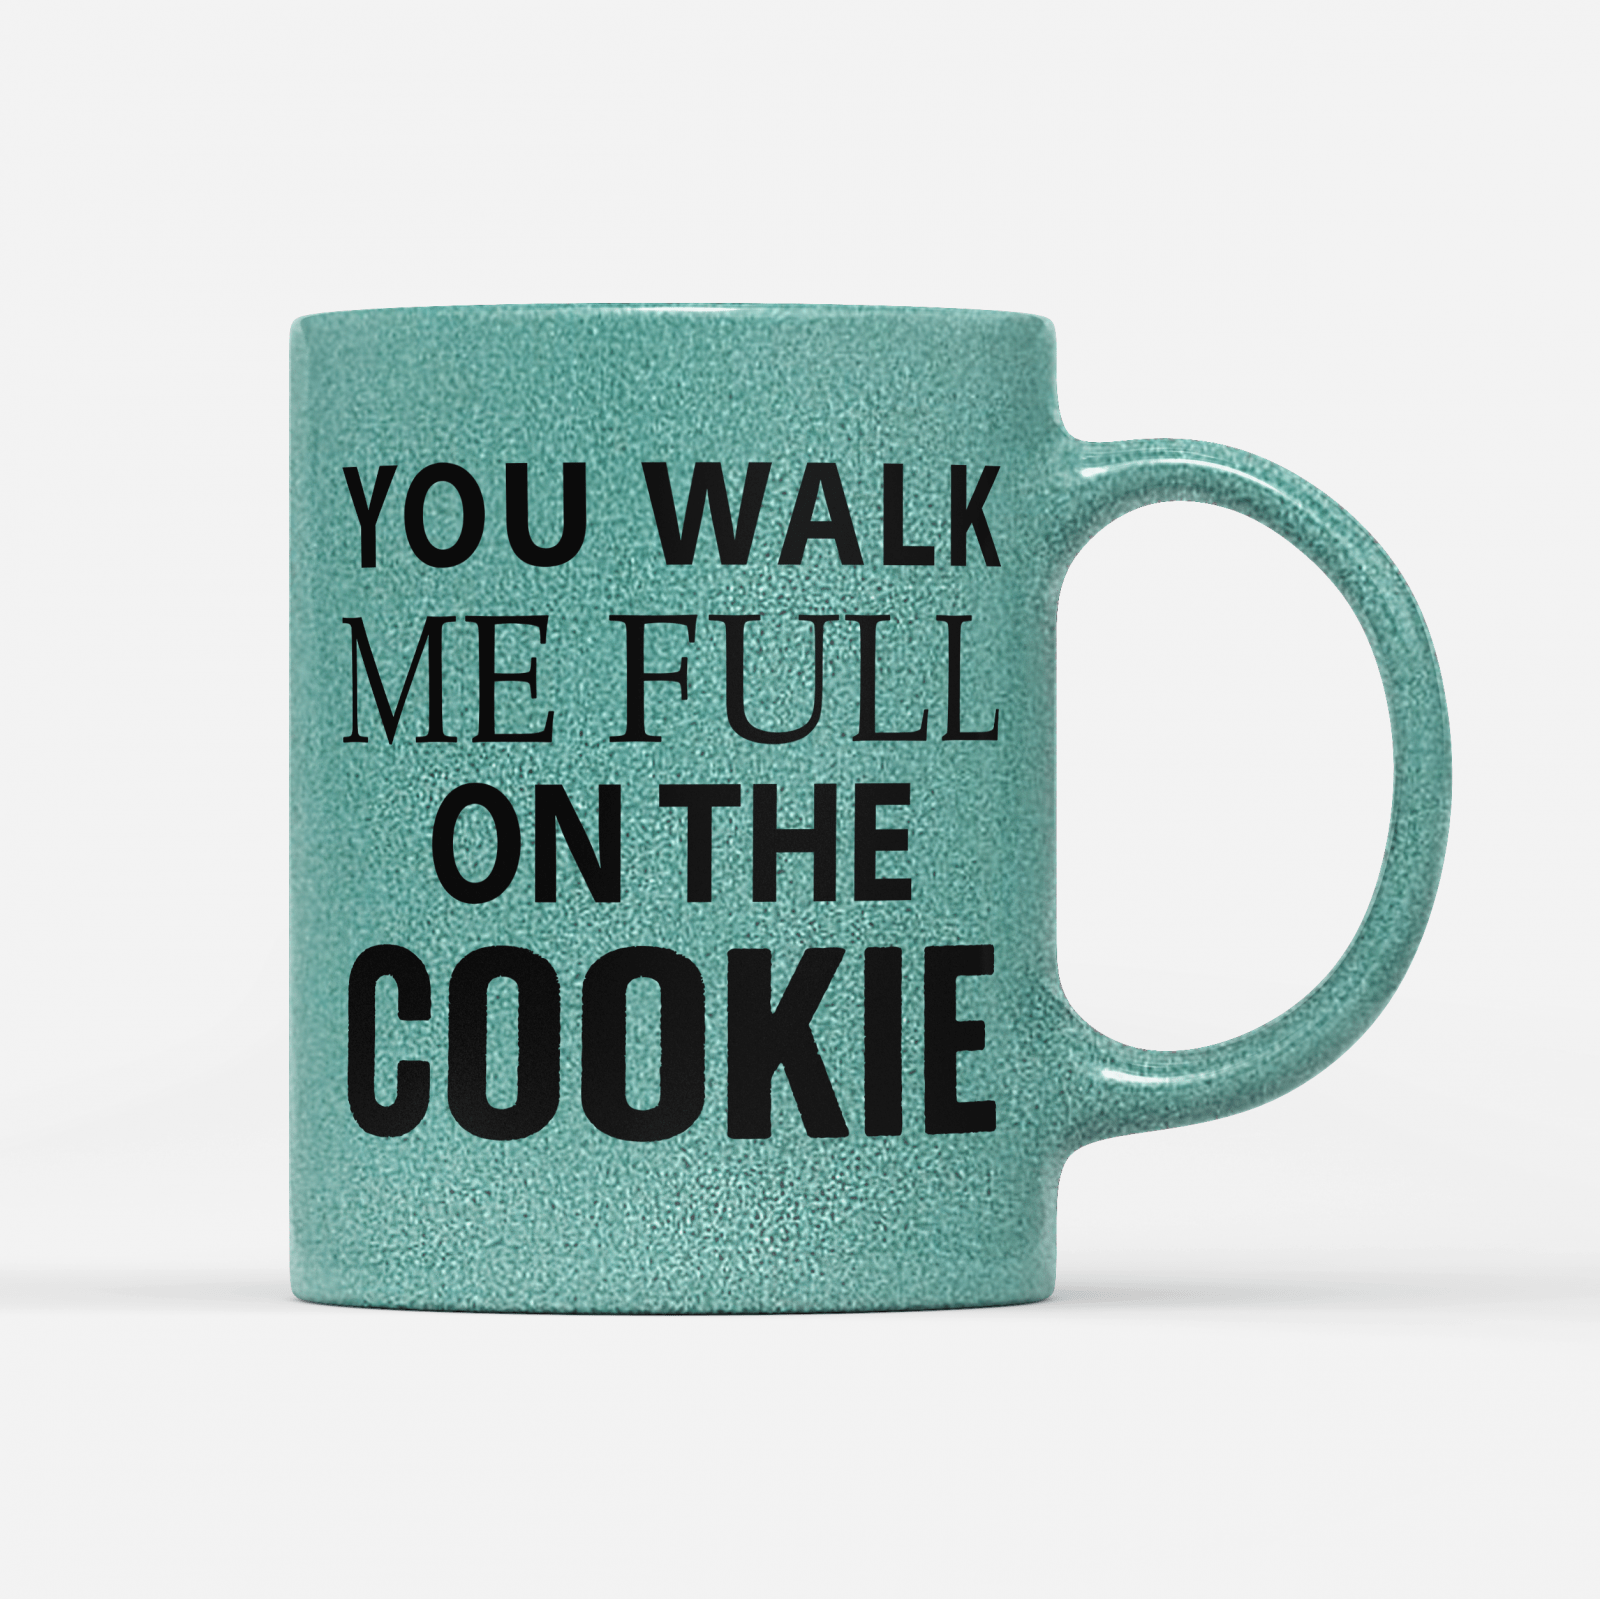 Tasse Glitzer Edition You walk me full on the Cookie